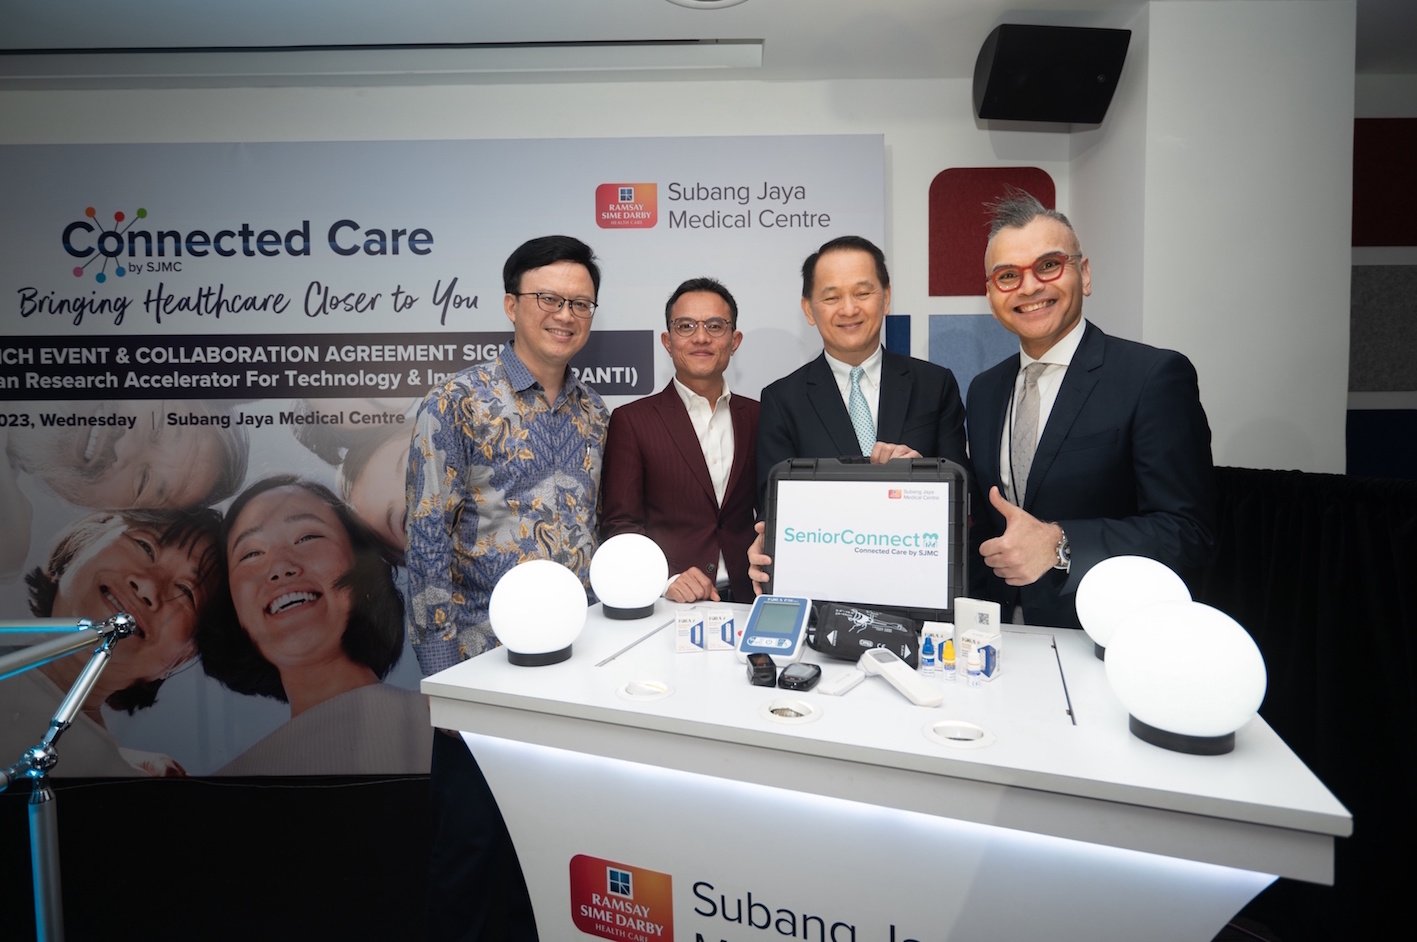 Image caption- From left to right: Peter Hong, Group Chief Executive Officer of Ramsay Sime Darby Health Care Sdn Bhd (RSDH), Khairil Anuar Sadat Salleh, Chief Commercial Officer, Malaysian Research Accelerator for Technology & Innovation (MRANTI), Bryan 